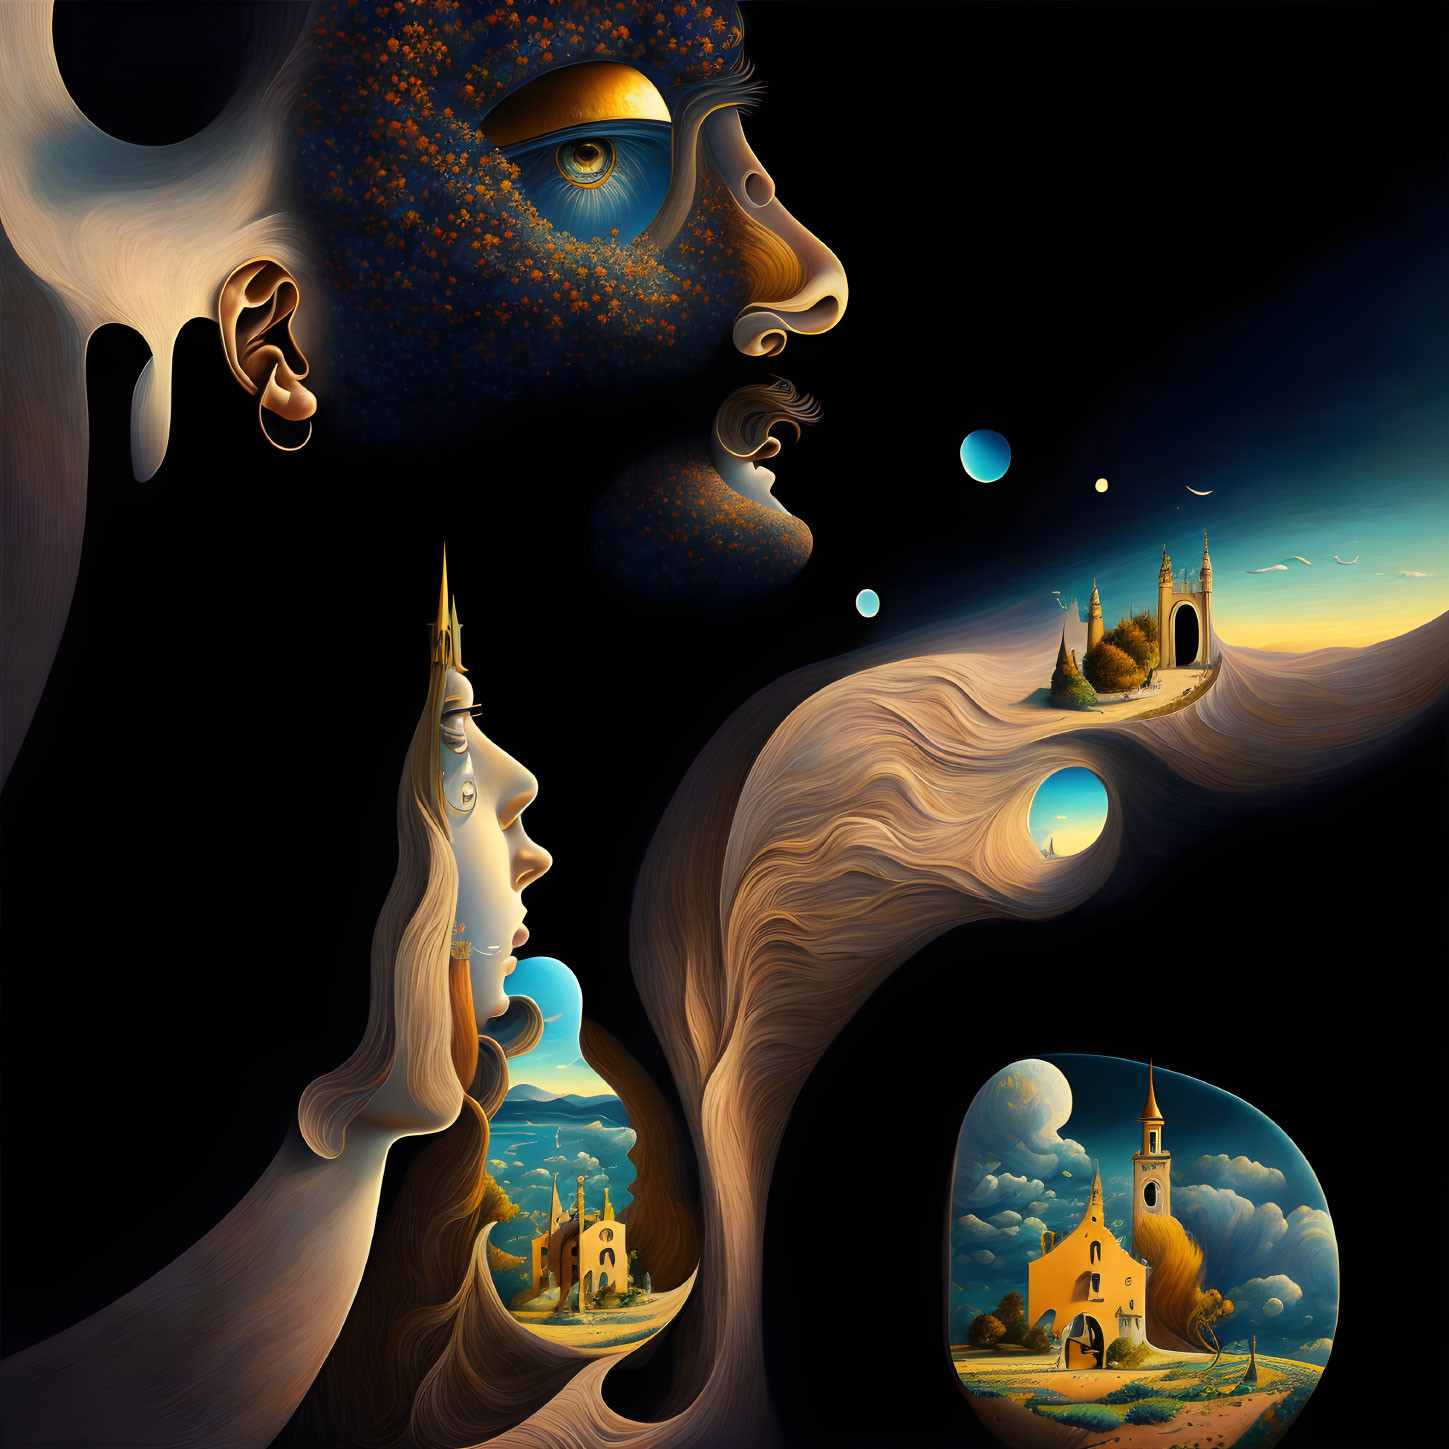 Surreal artwork: Male and female faces merge into night landscape with church scenes.